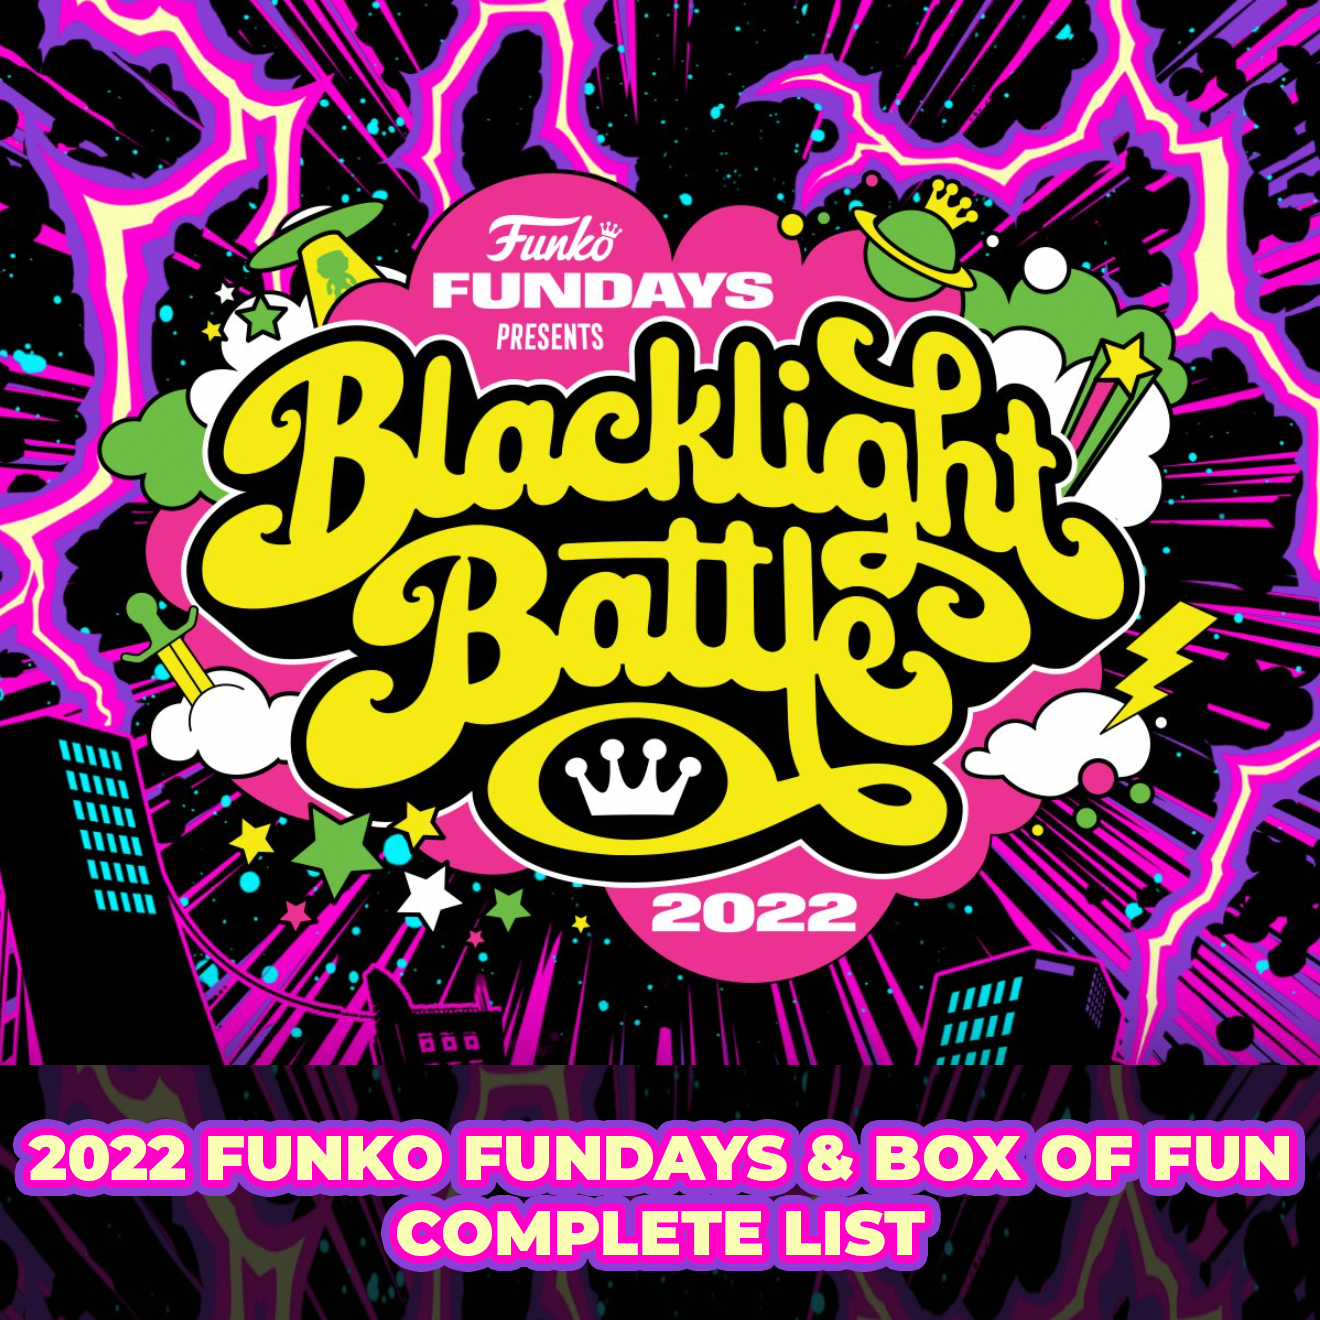 SDCC 2022 Funko Fundays, Box of Fun, Hall H & NFT Complete List with Links